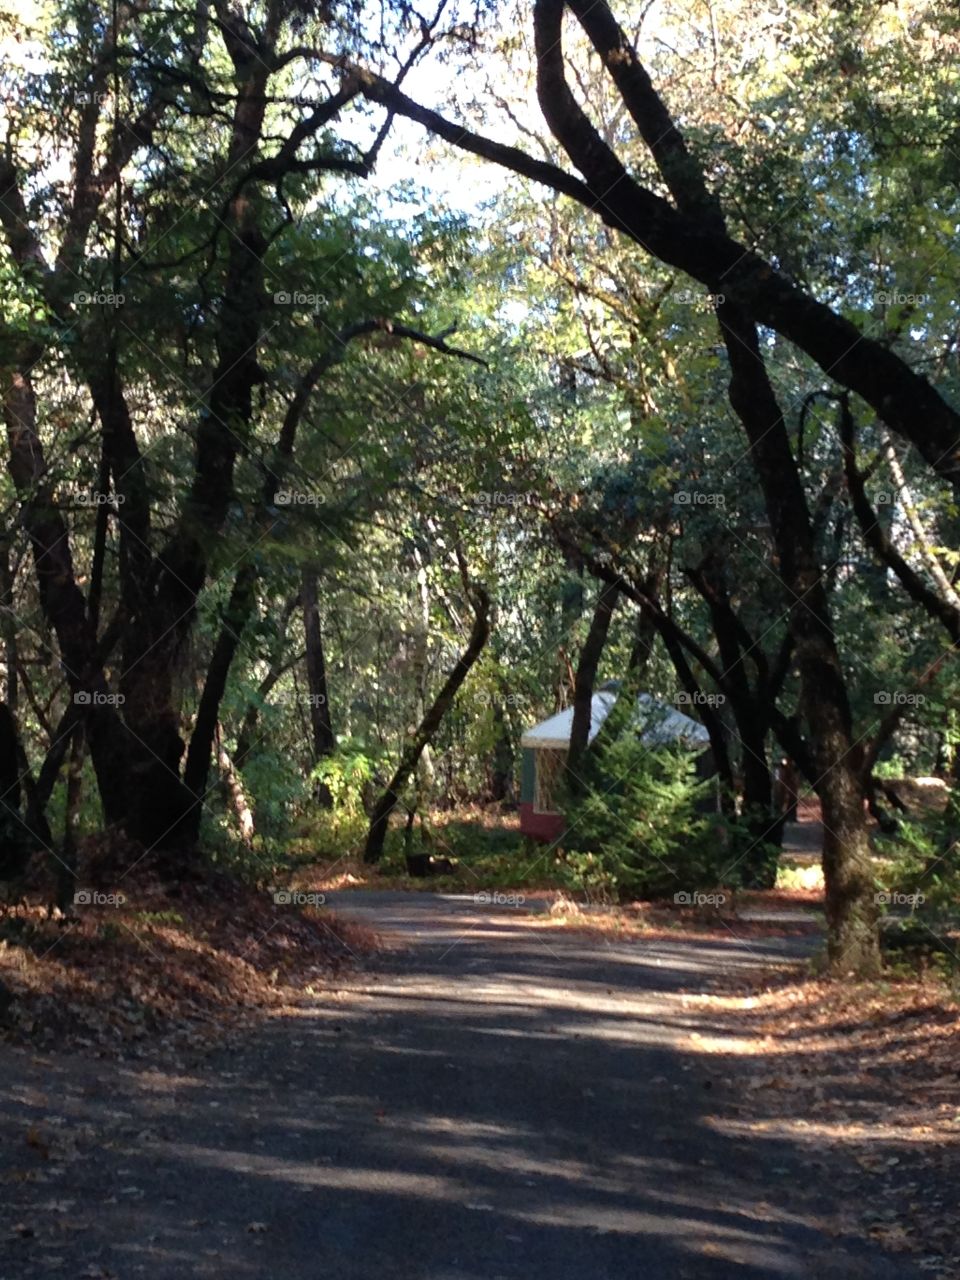 Around the corner. This is my view around the corner from my RV as I travel, staying in Calistoga, a slice of paradise!